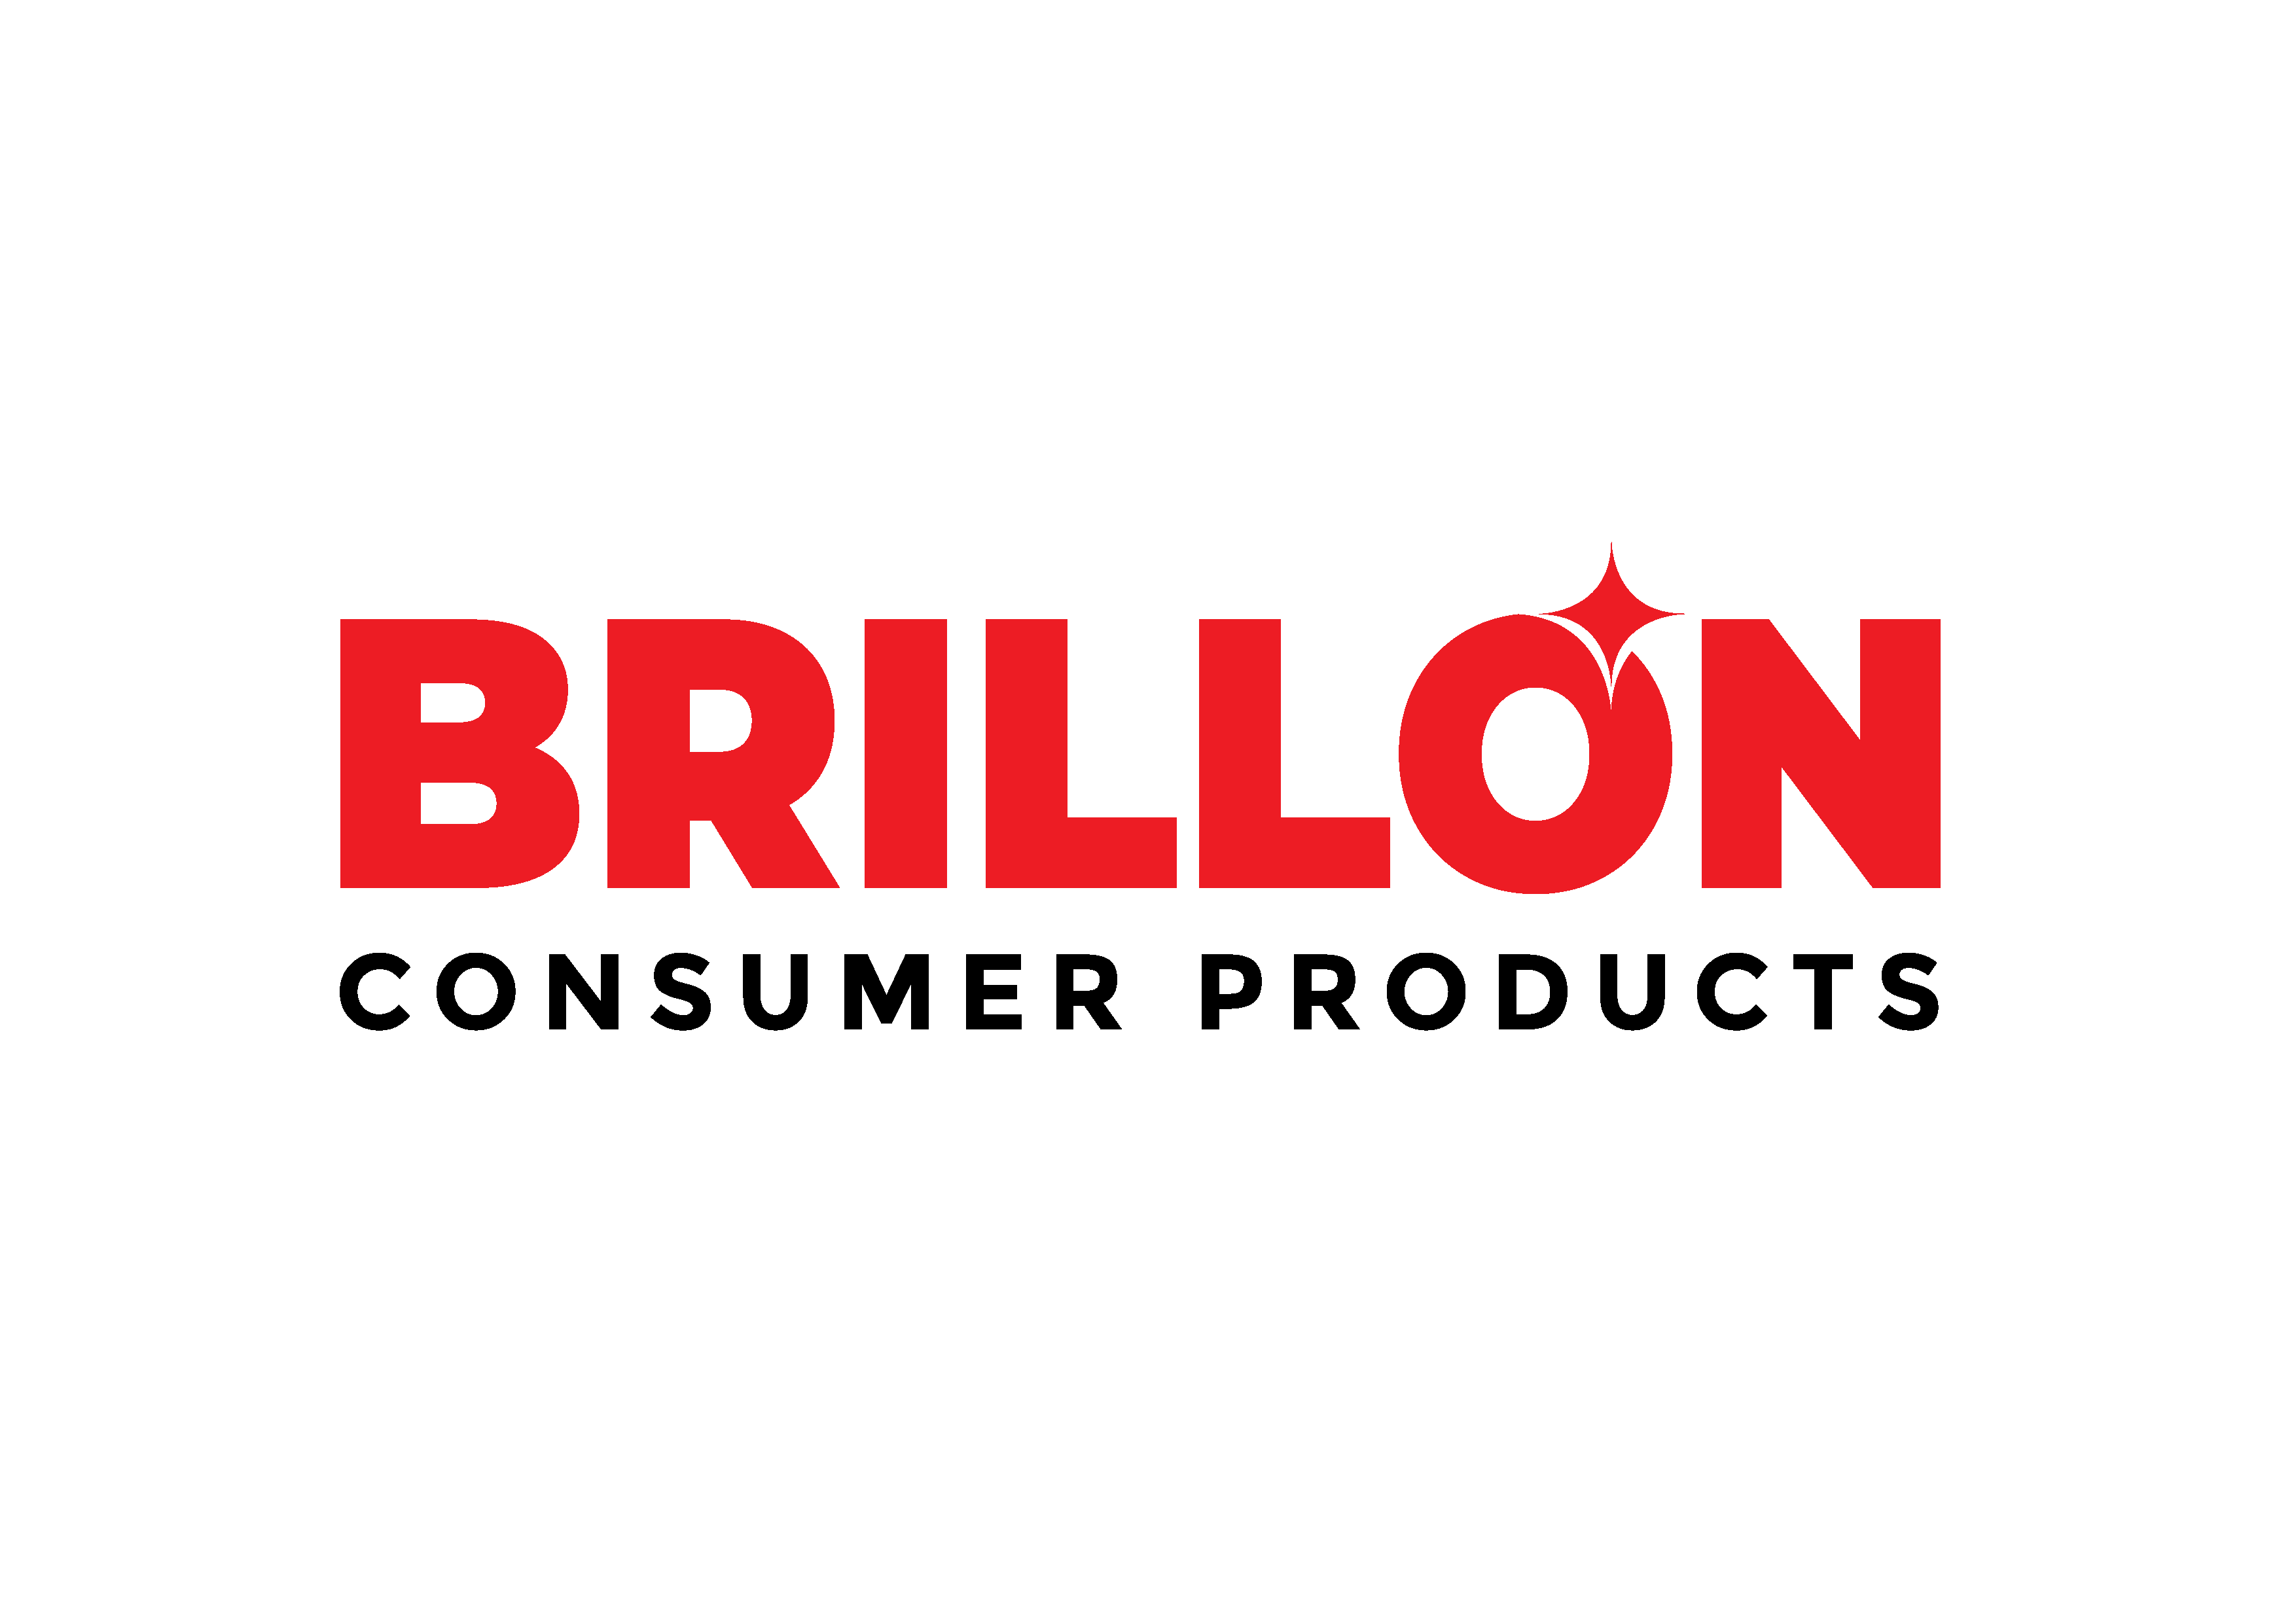 Brillon Consumer Products Pvt Ltd (formerly SC Johnson Products Pvt. Ltd.)